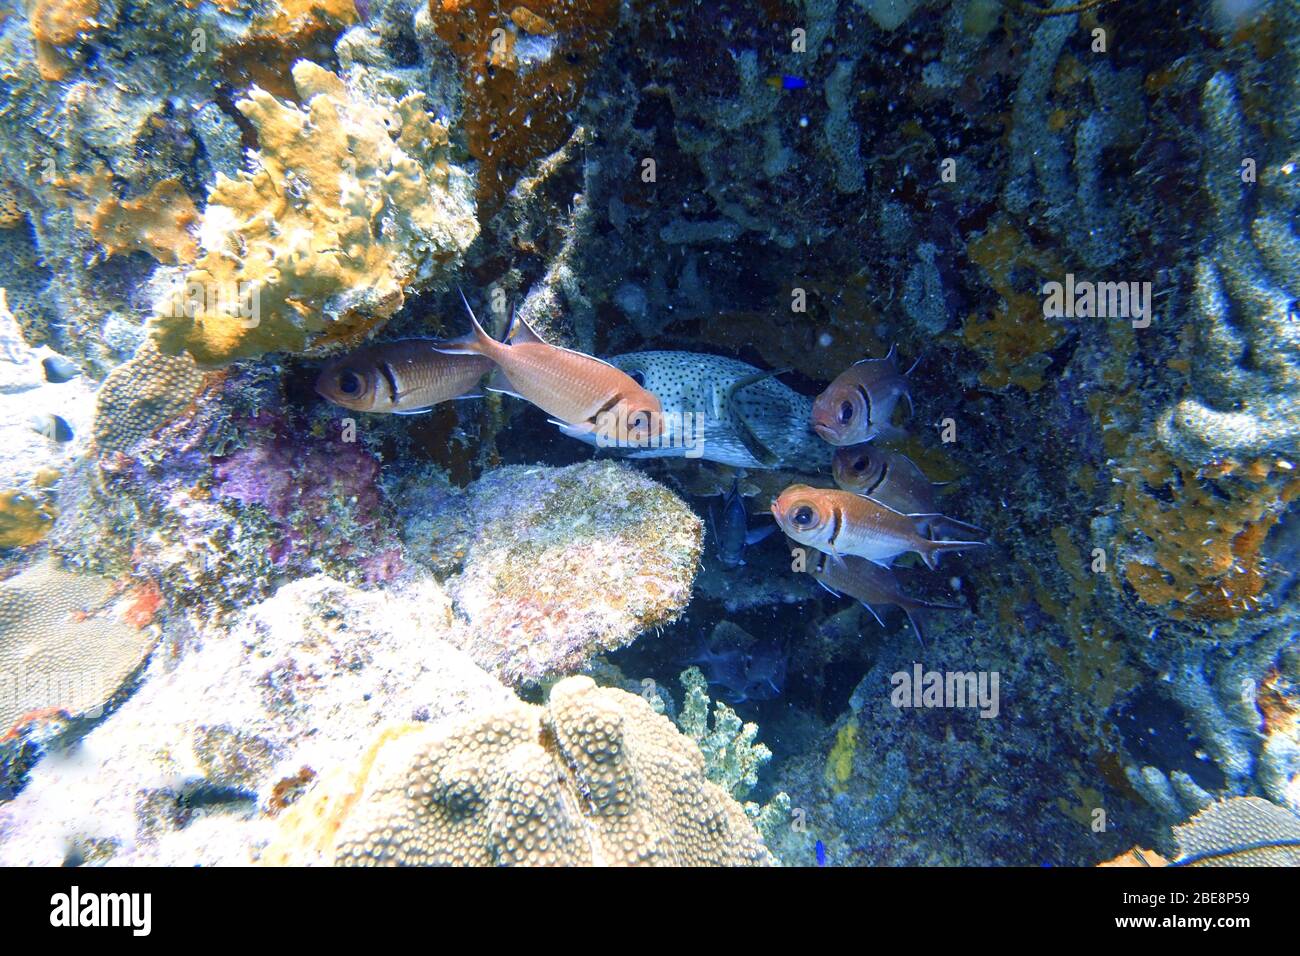 Pufferfish (Tetraodontidae) hiding from predators in between the coral alongside a big eyed squirrelfish (Holocentridae). Stock Photo